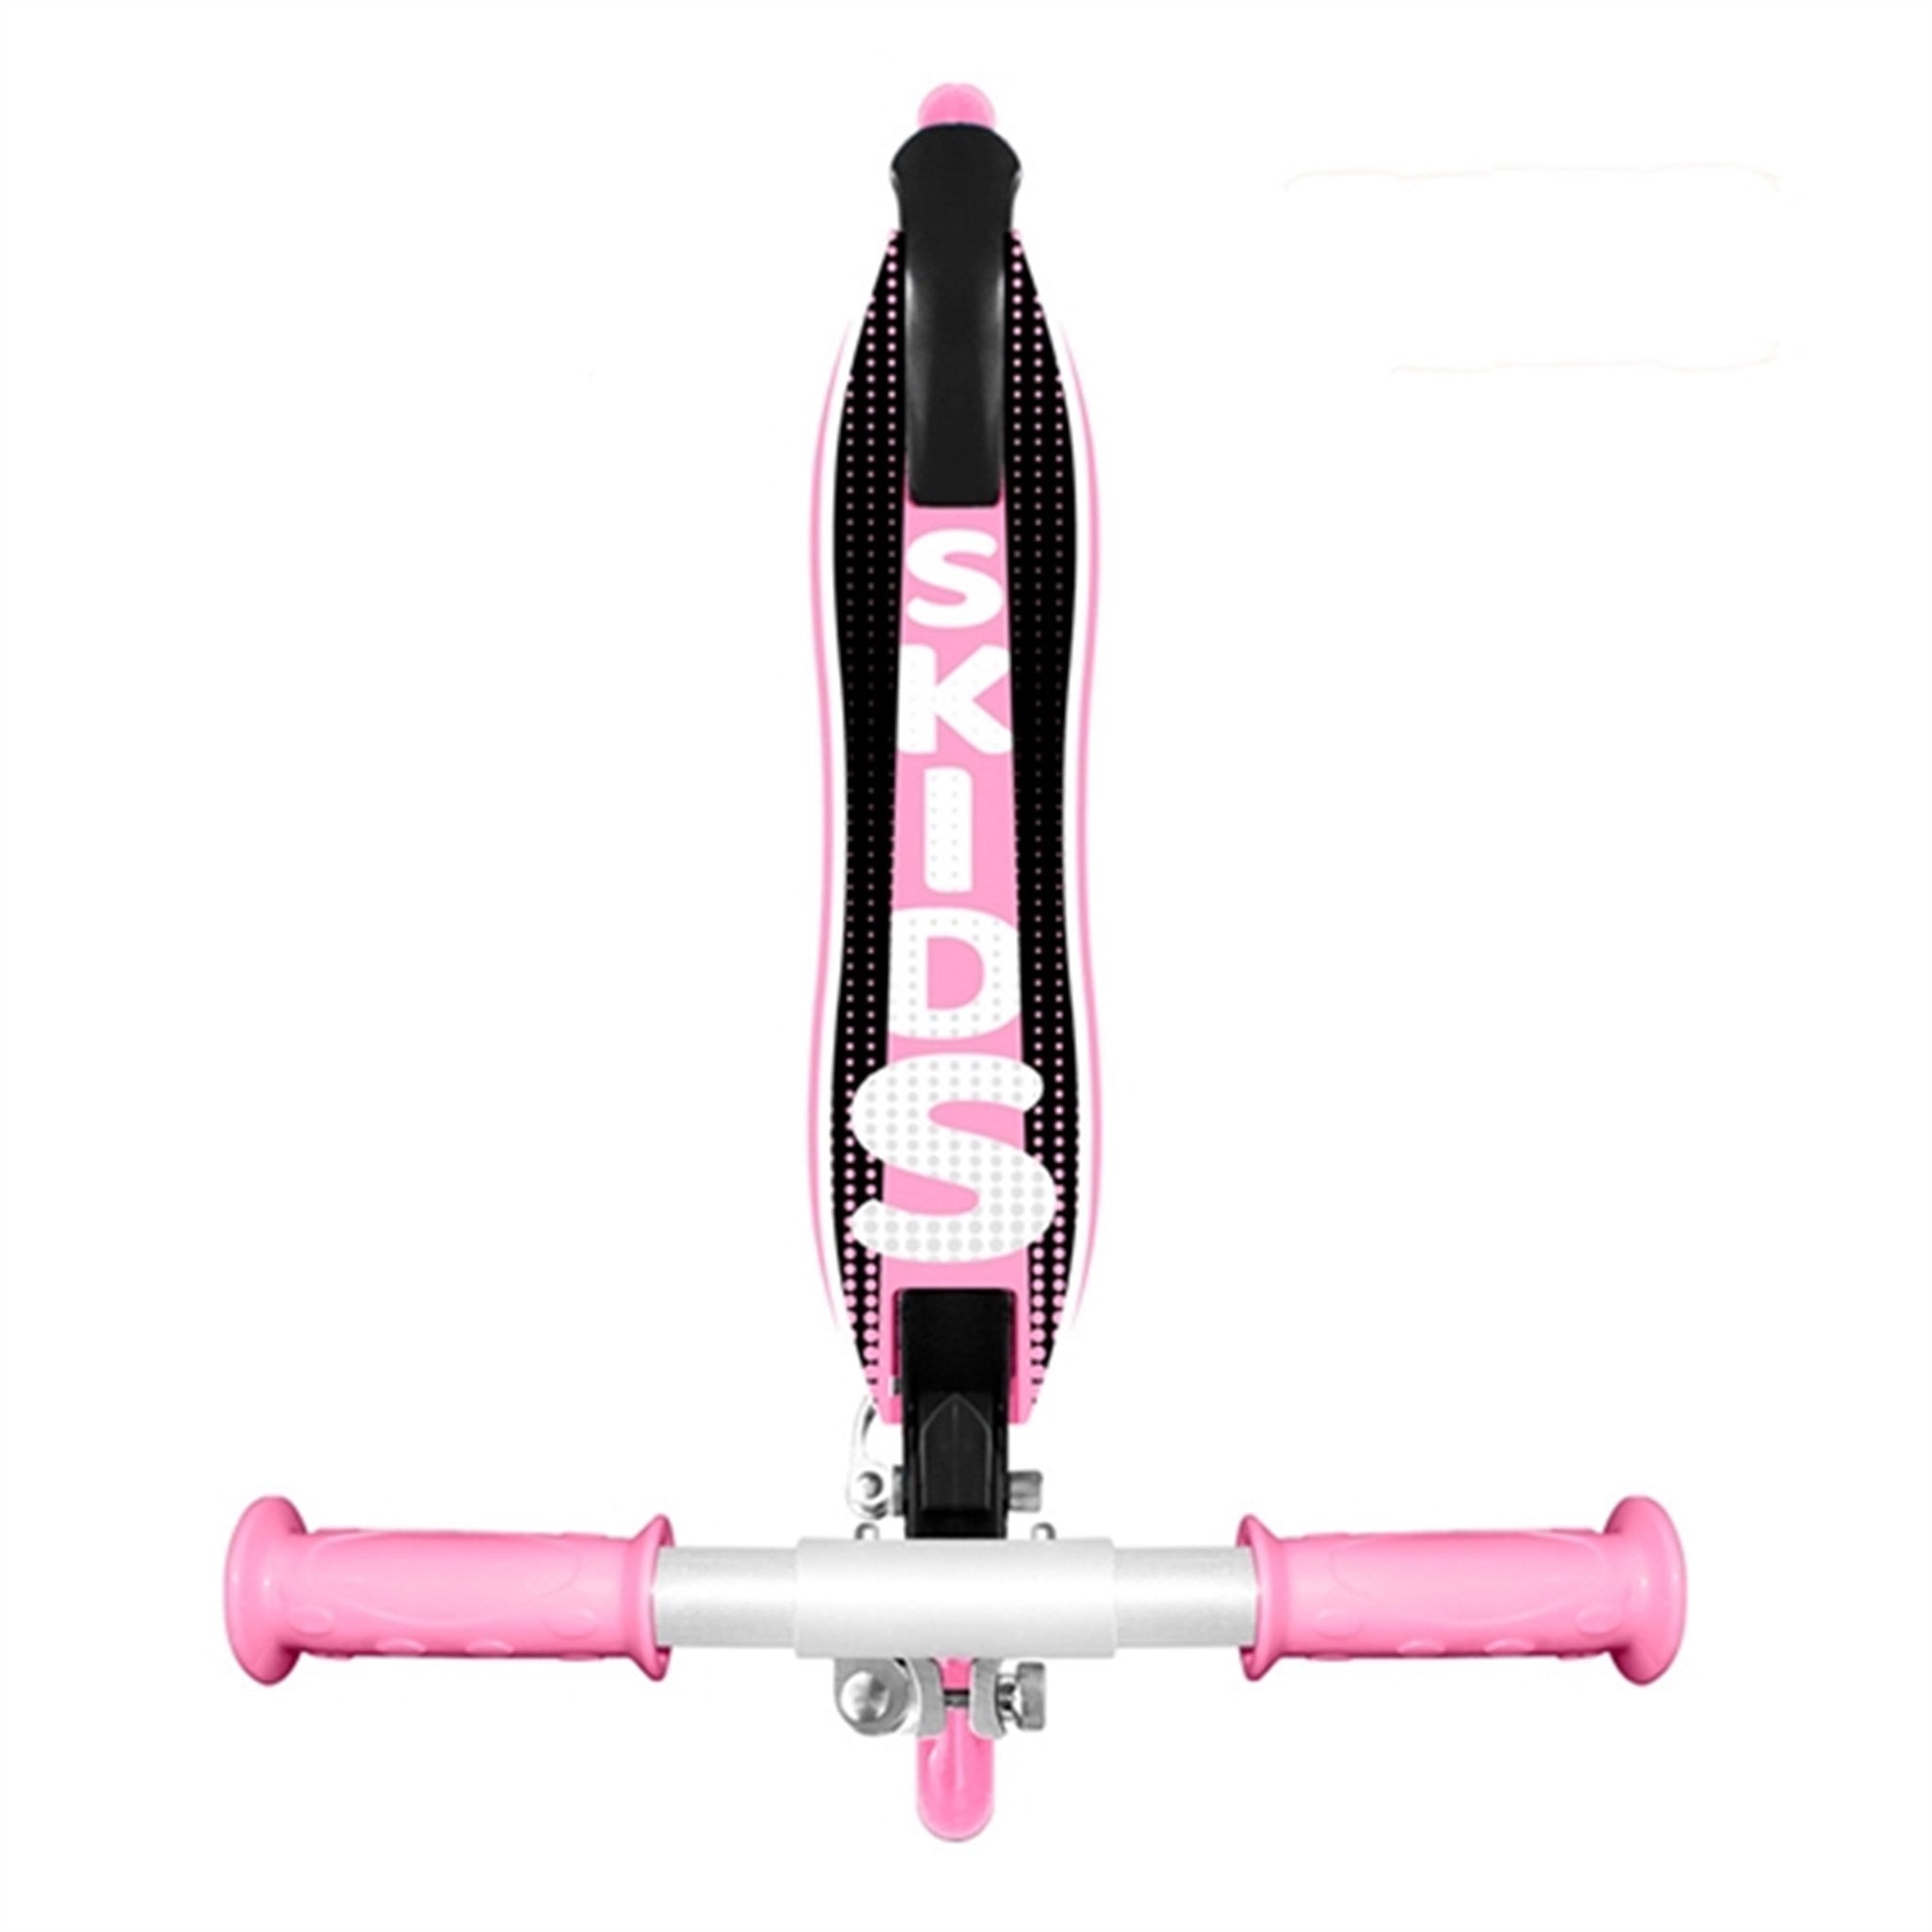 Skids Control Foldable Scooter Pink 2